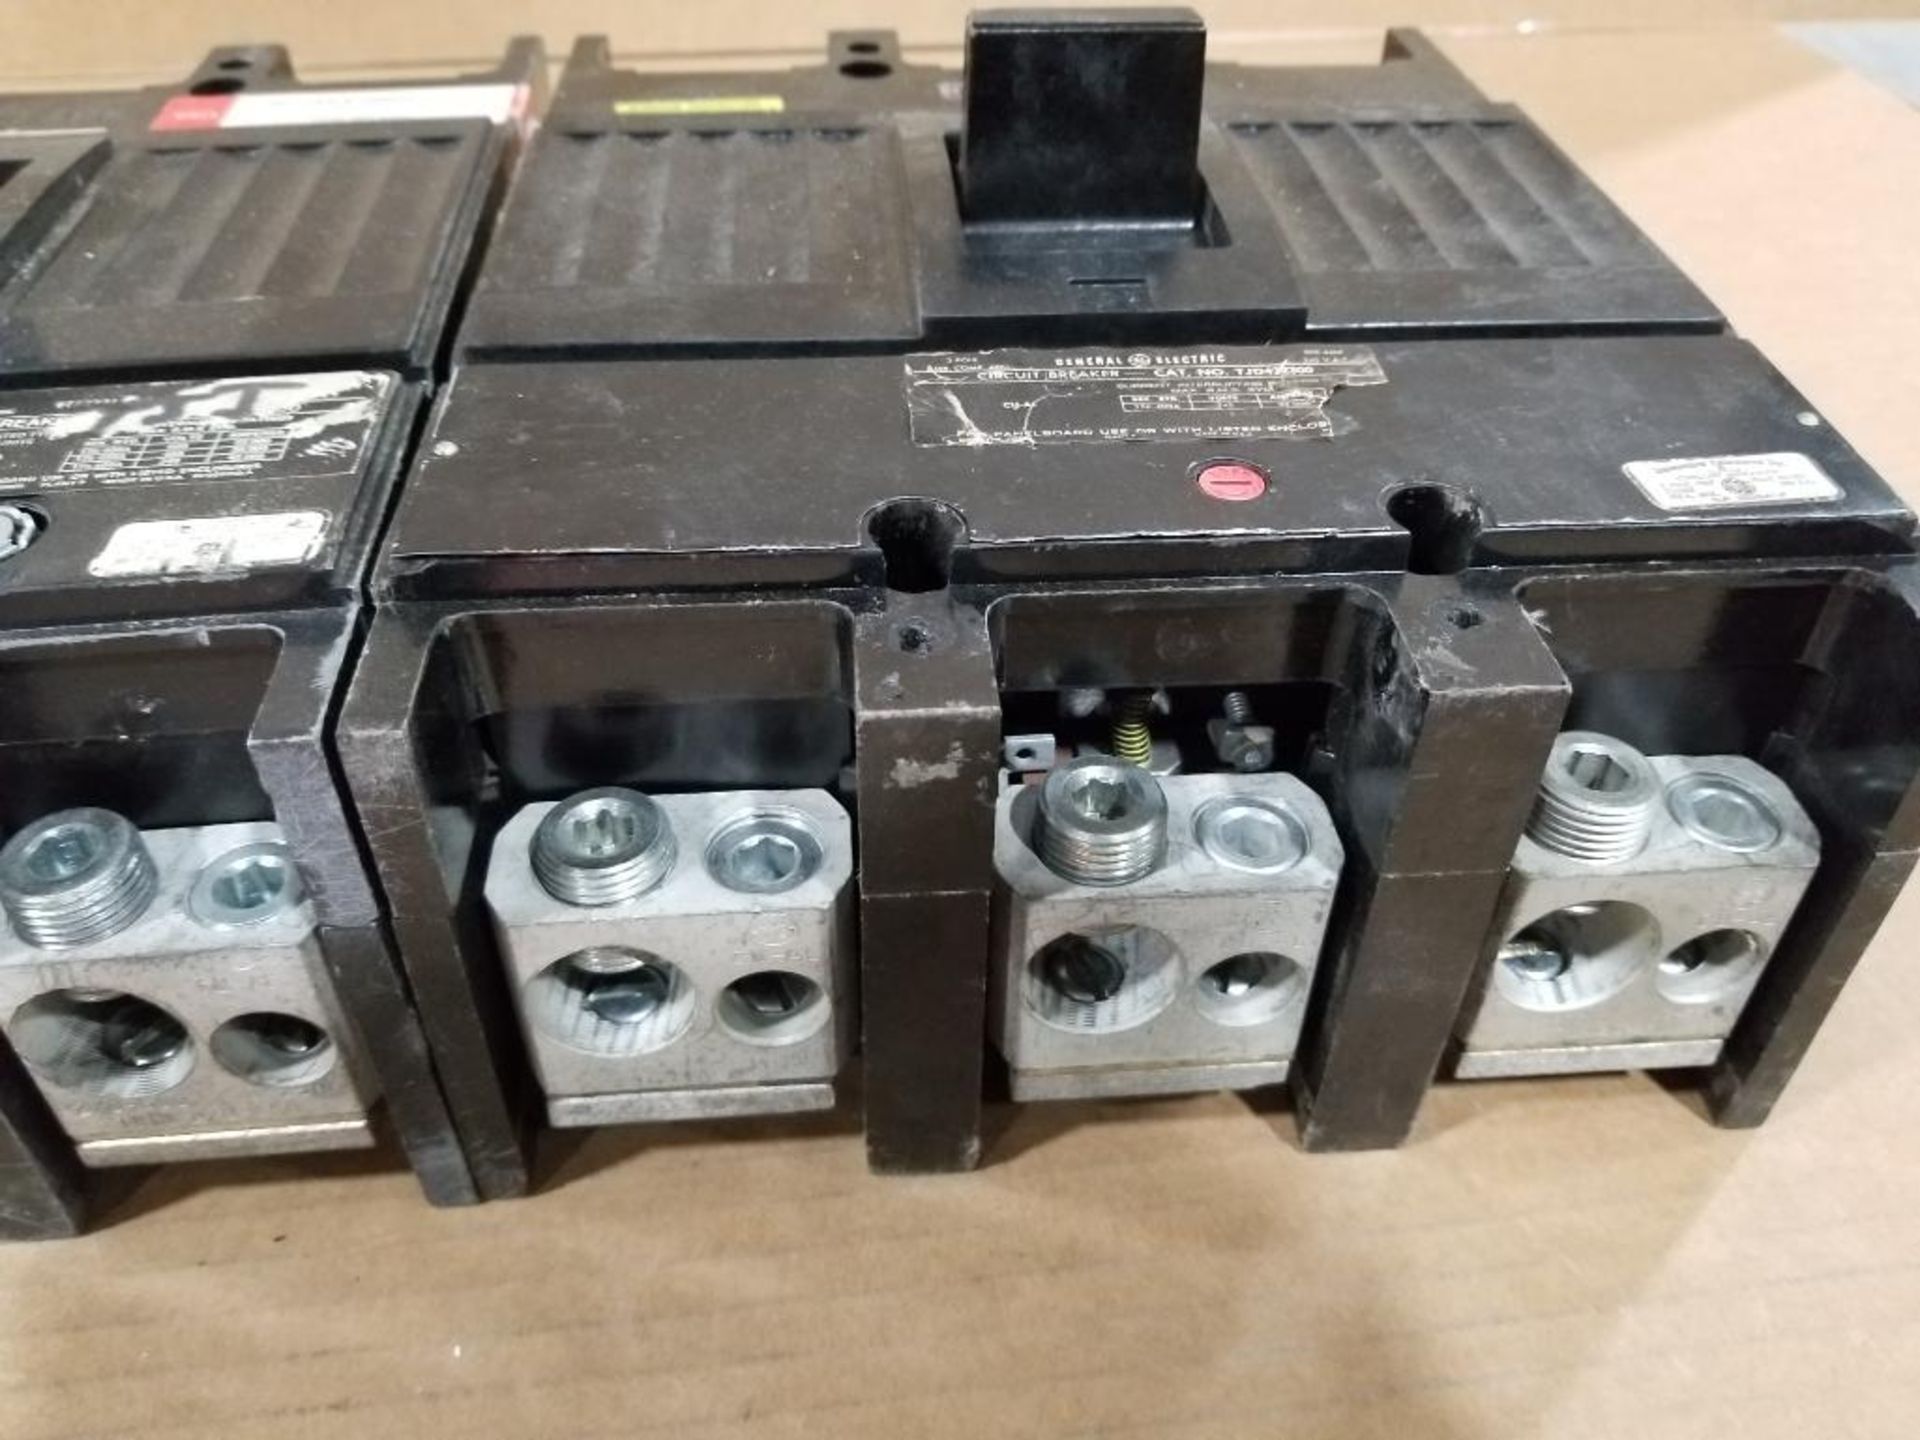 Qty 2 - GE Molded case circuit breakers. - Image 5 of 5